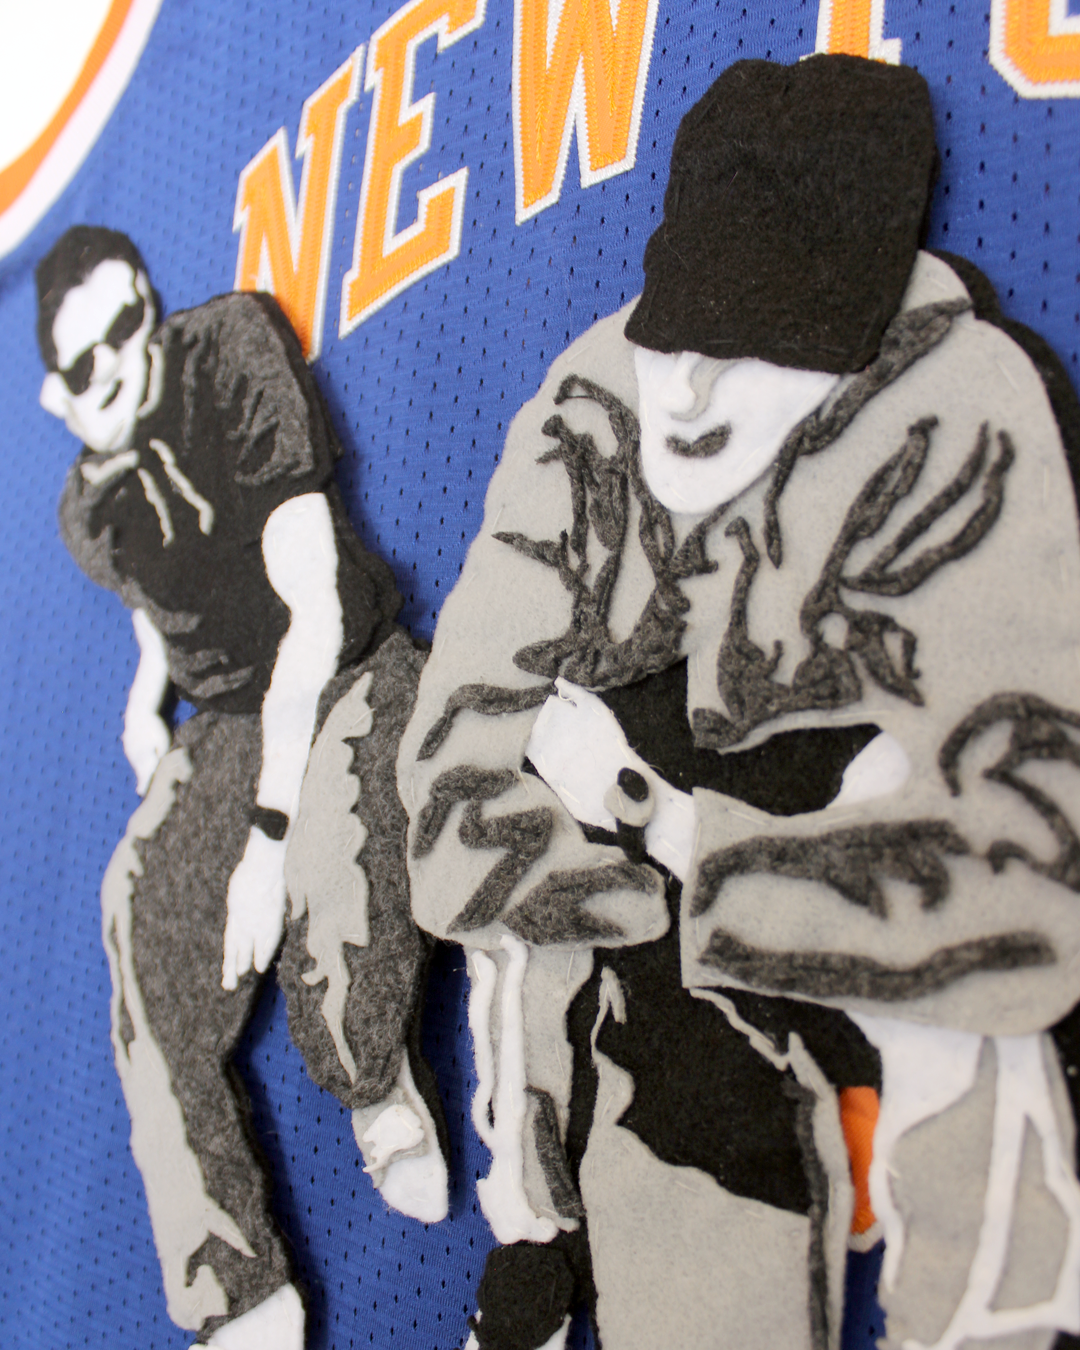 beastie-boys-knicks-jersey-miked.png